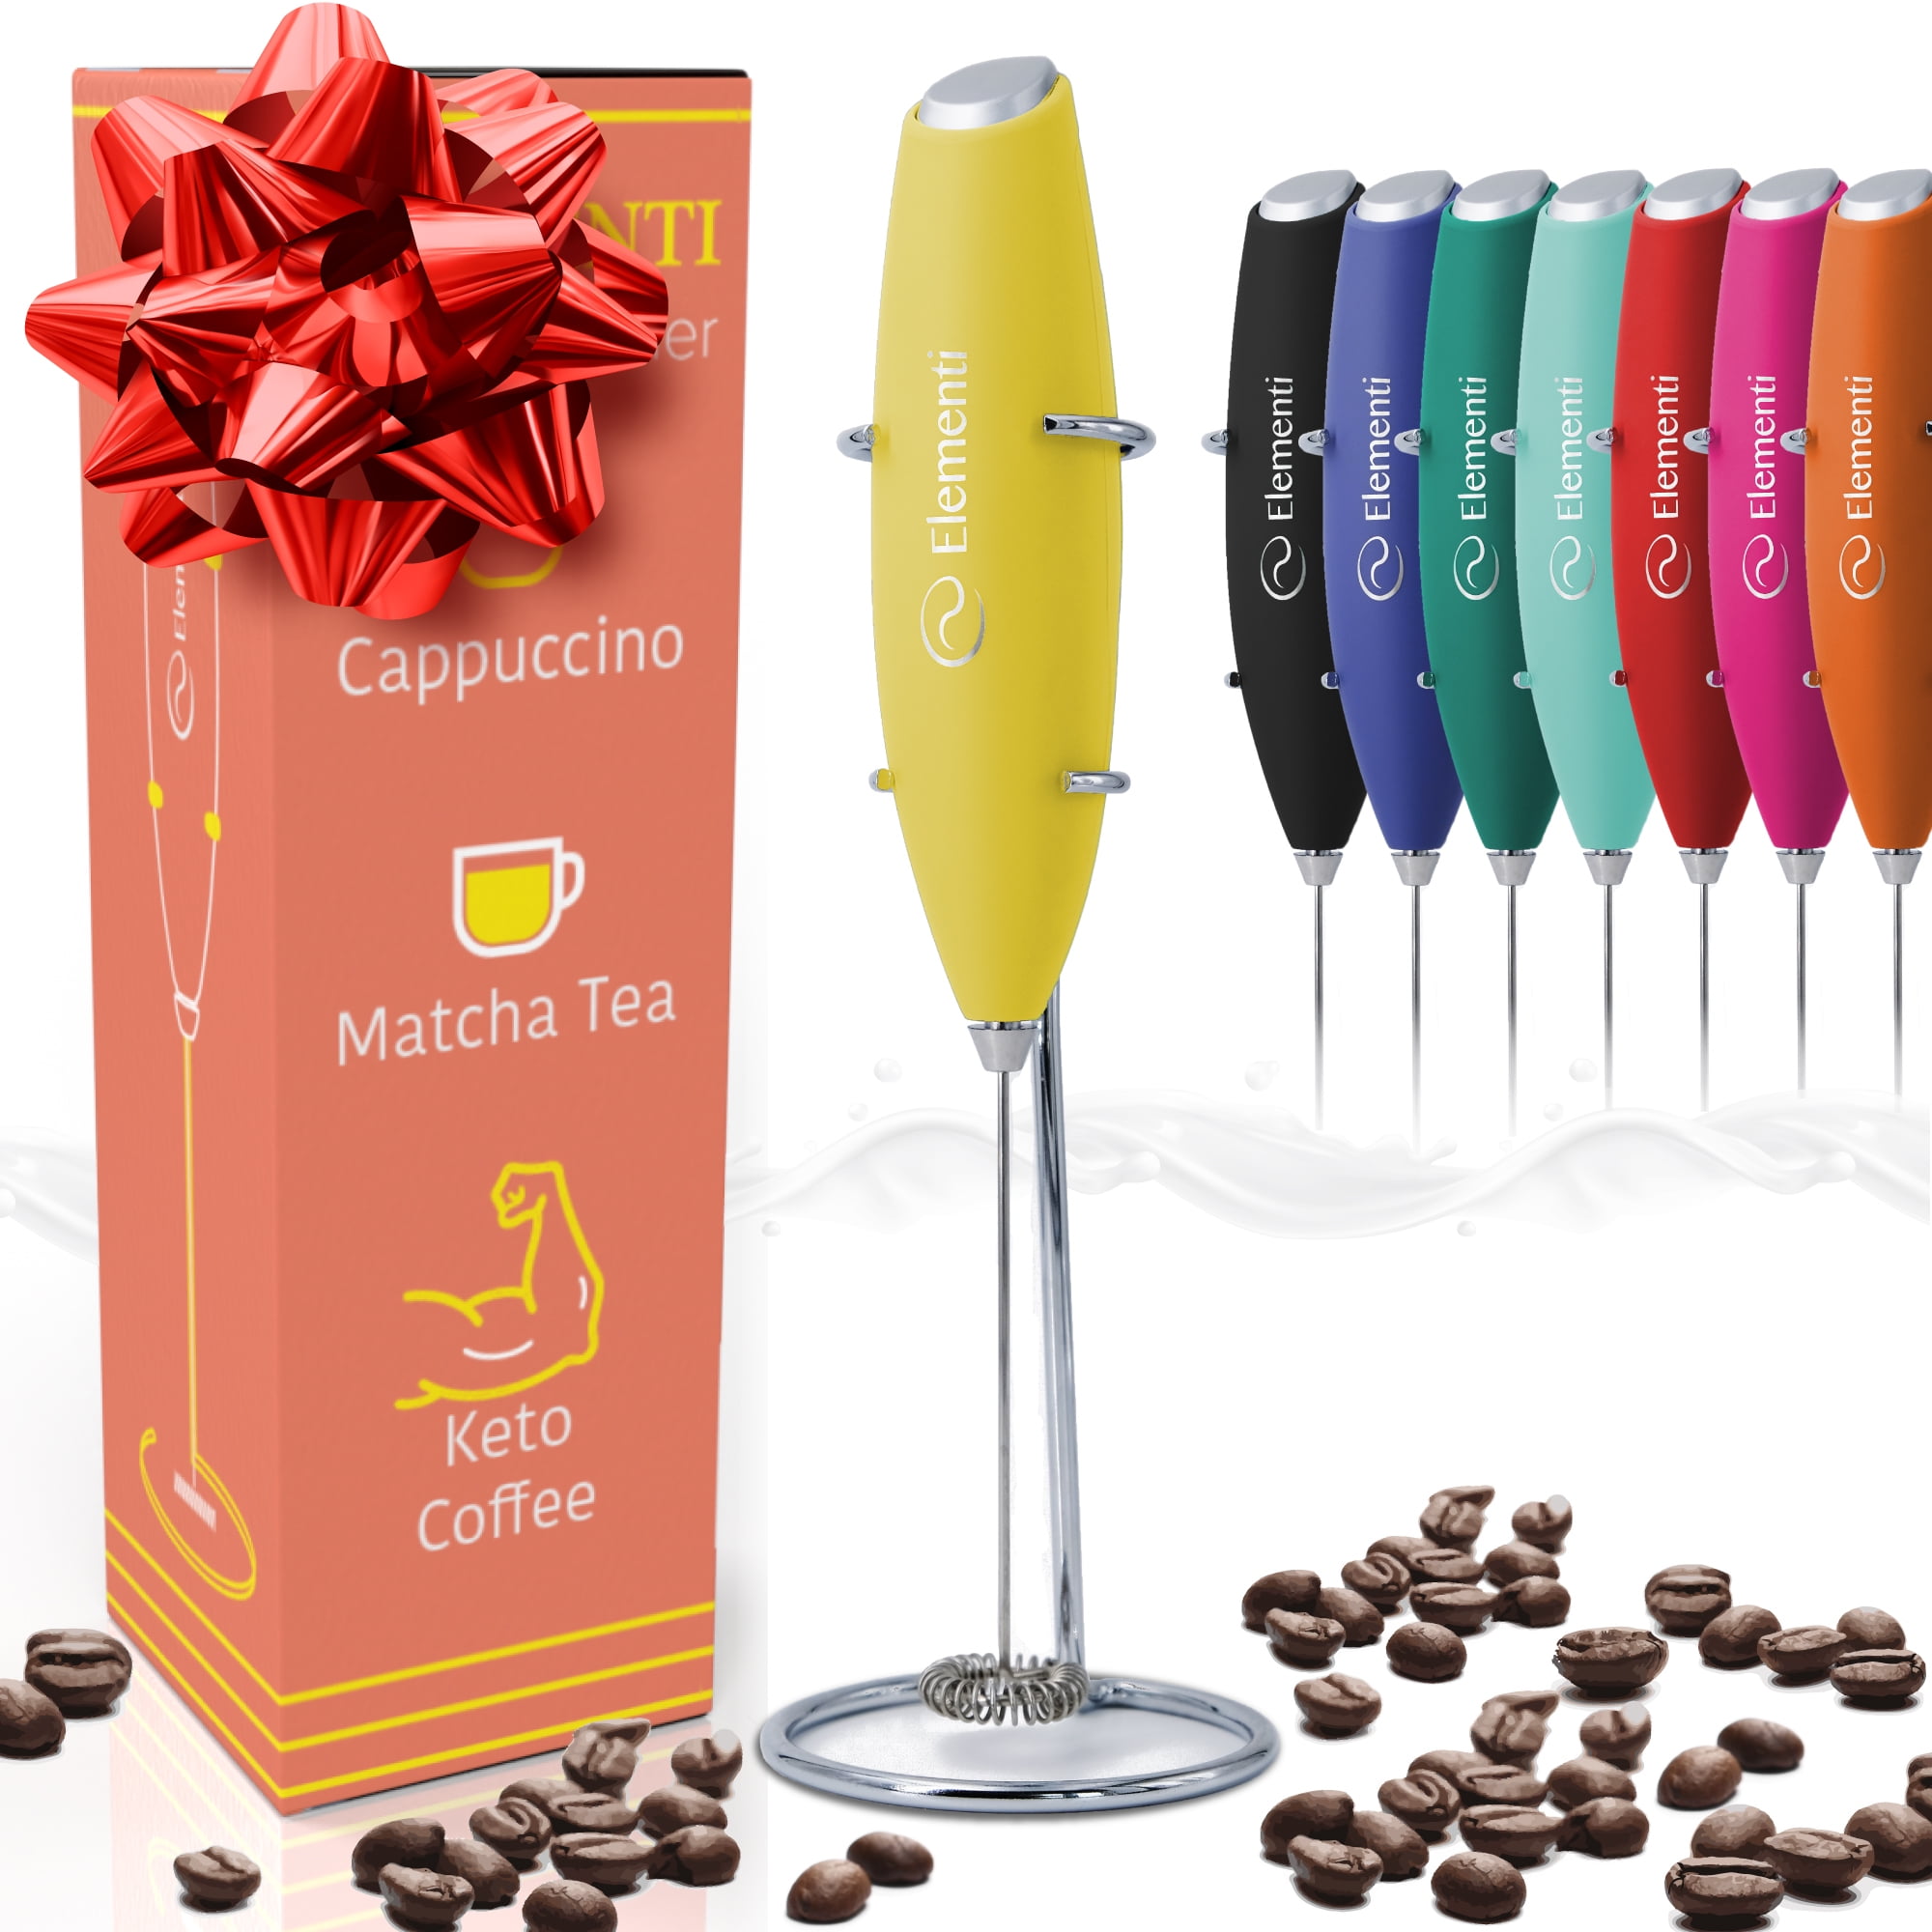 Coffee Lovers Are Obsessed With This Milk Frother